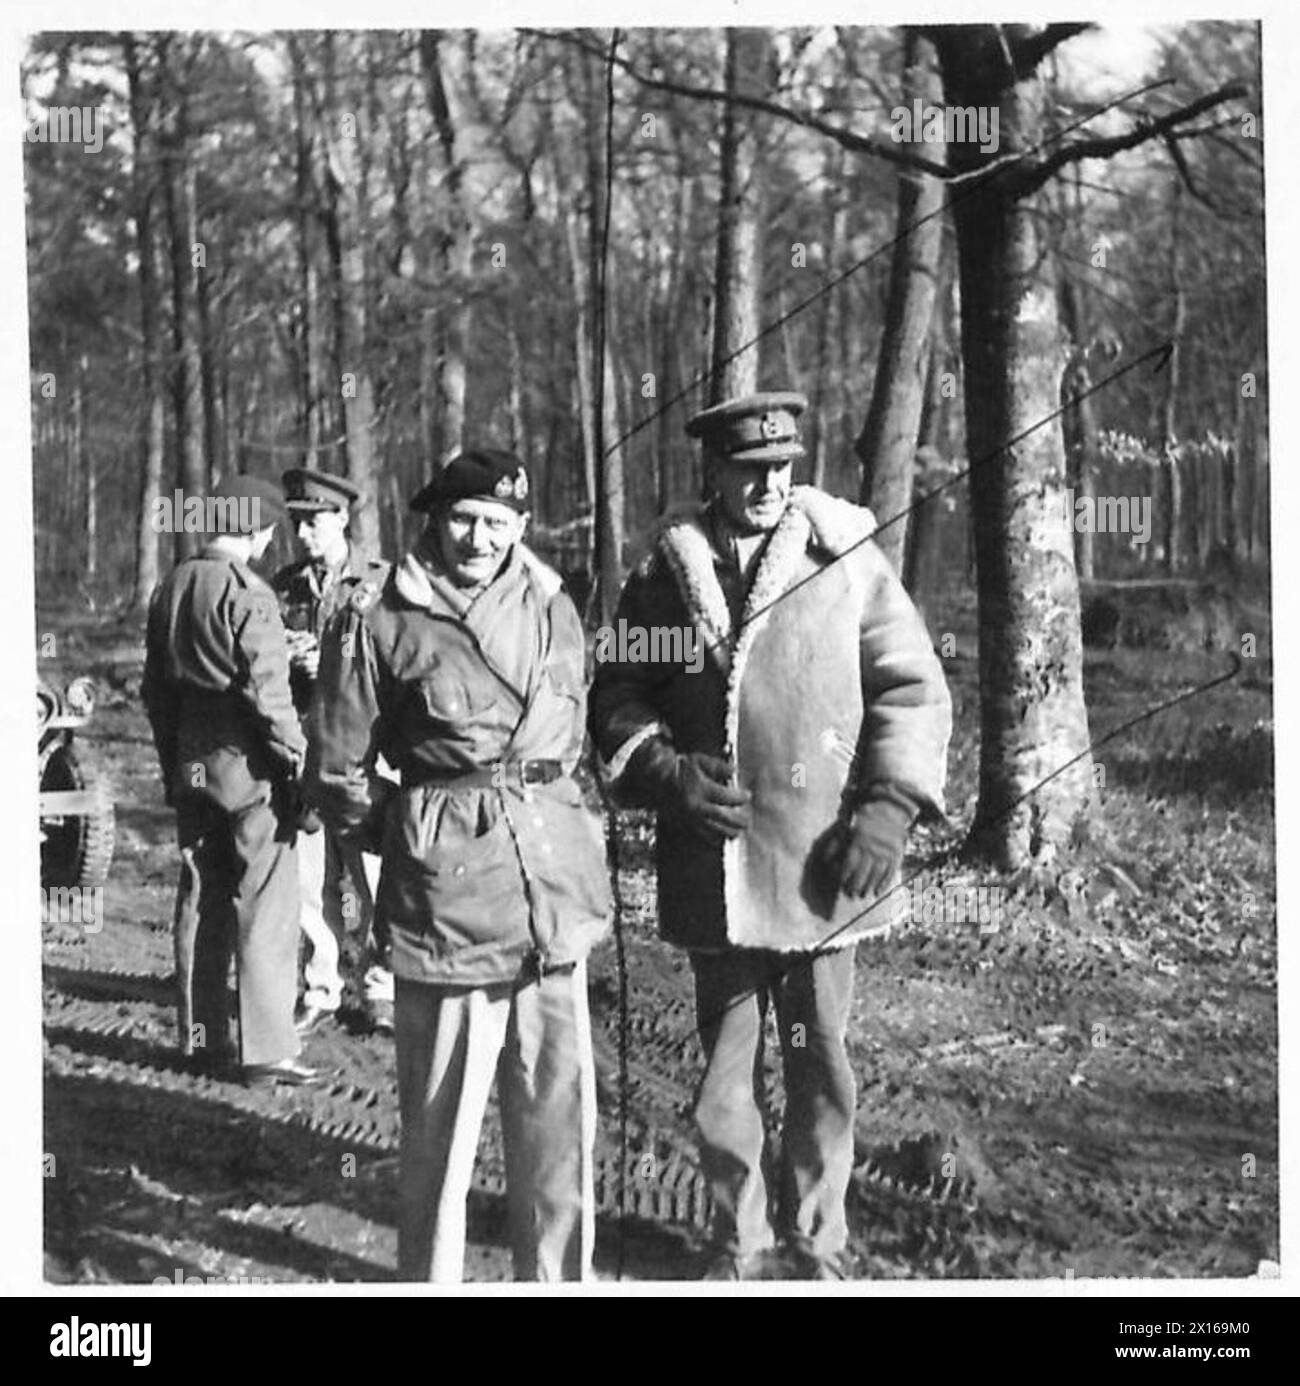 THE C-in-C WITH HIS FORWARD TROOPS - The C-in-C with Lt-Gen B.C. Horrocks, GOC 30 Corps who is wearing a captured German sheepskin coat British Army, 21st Army Group Stock Photo